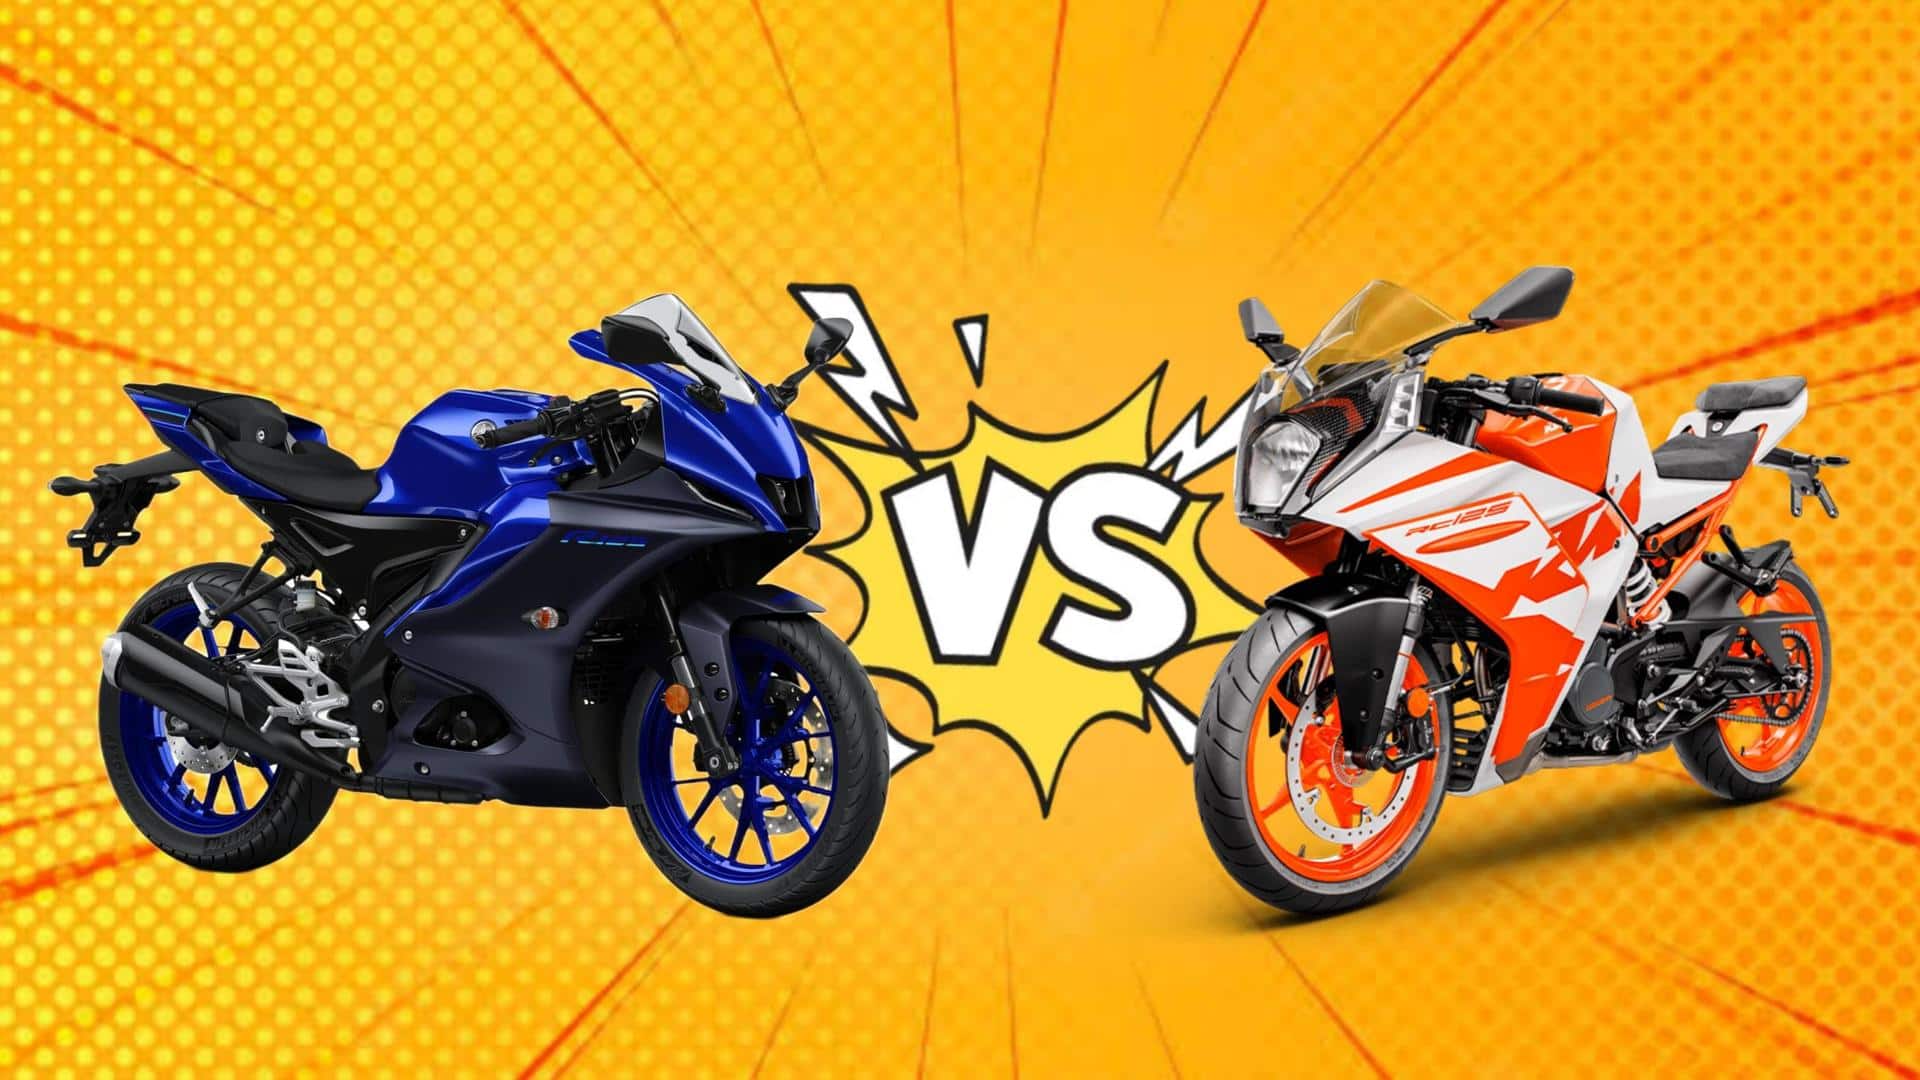 Yamaha R125 v/s KTM RC 125: Which one is better?